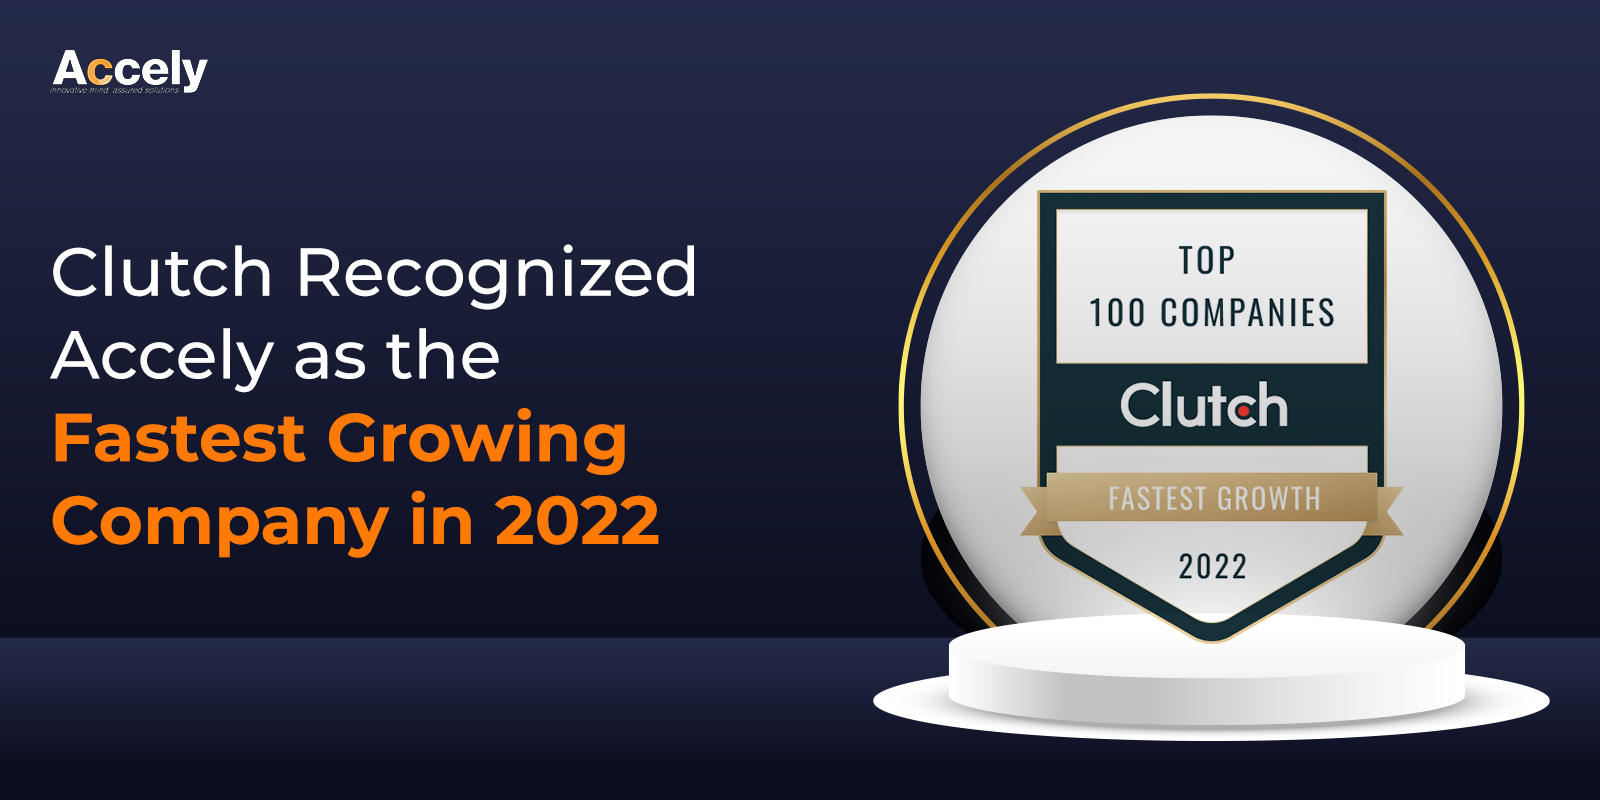 Clutch Recognized Accely as the Fastest Growing Company in 2022